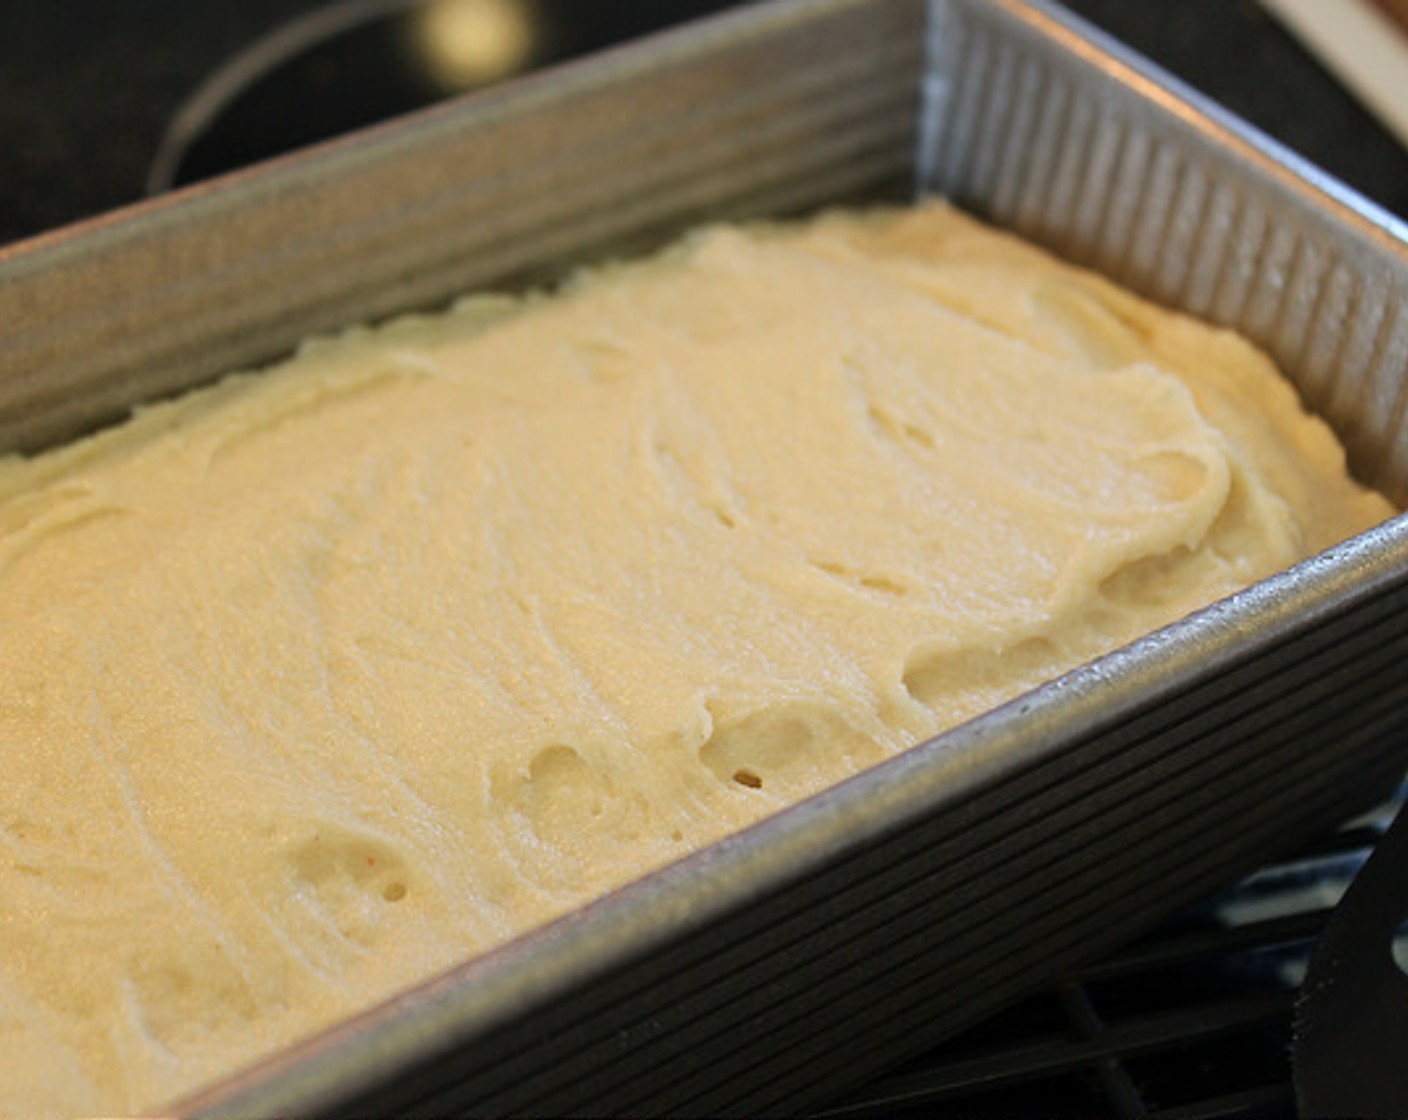 step 7 Using a spatula, scrape the bread mixture into your prepared loaf pan and set on top of your stove to proof while the oven is preheating. Be sure to smooth out the loaf with spatula or wet fingers before proofing as the loaf will not smooth out itself.